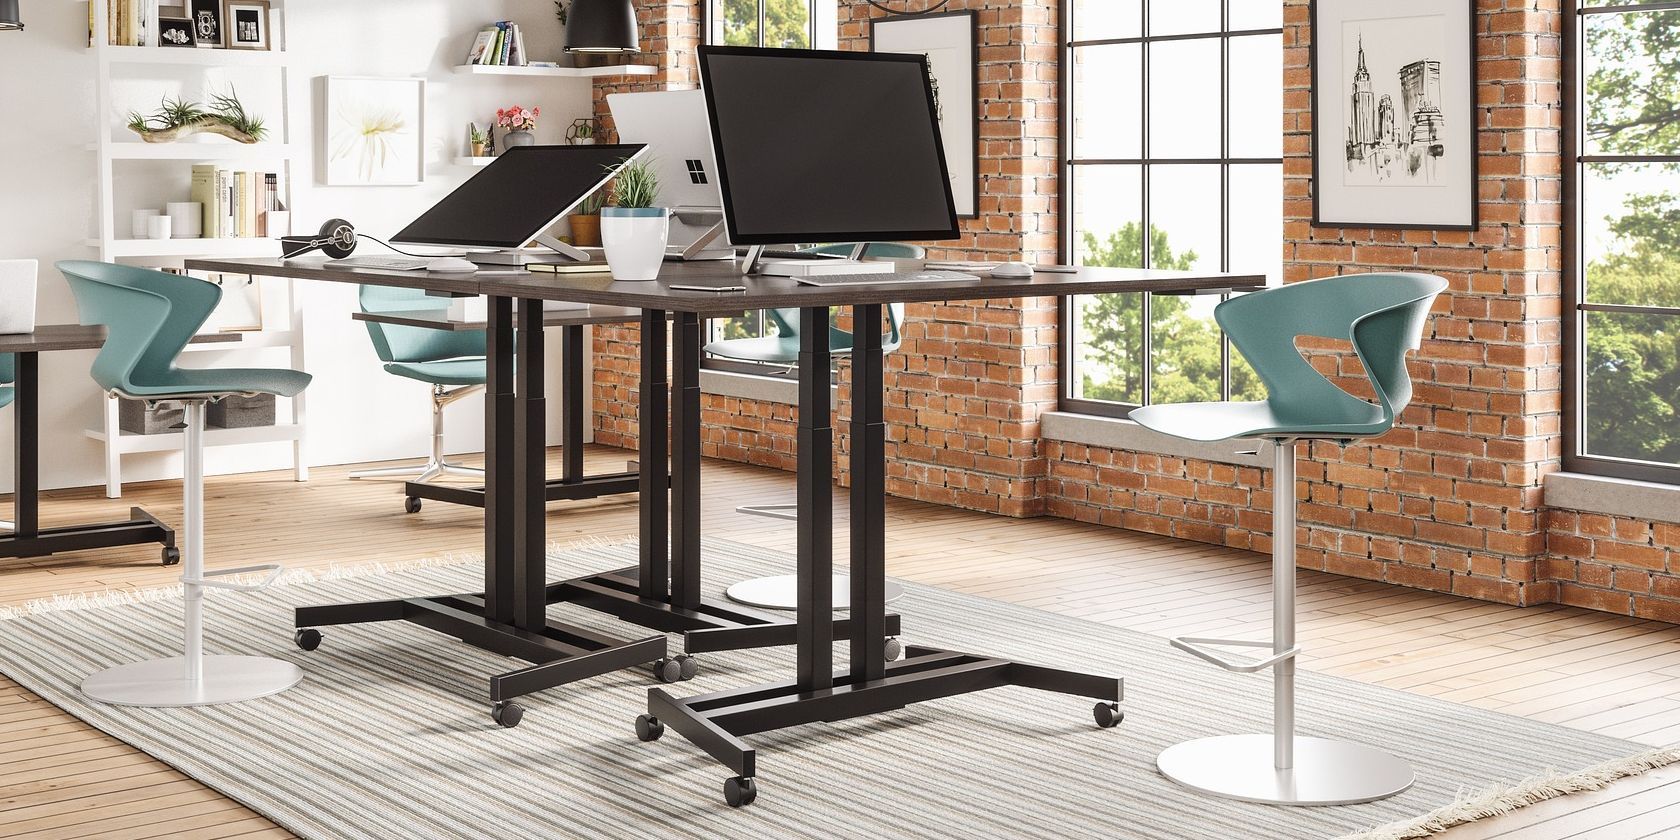 three standing desks accompanied by three high chairs, positioned in an office